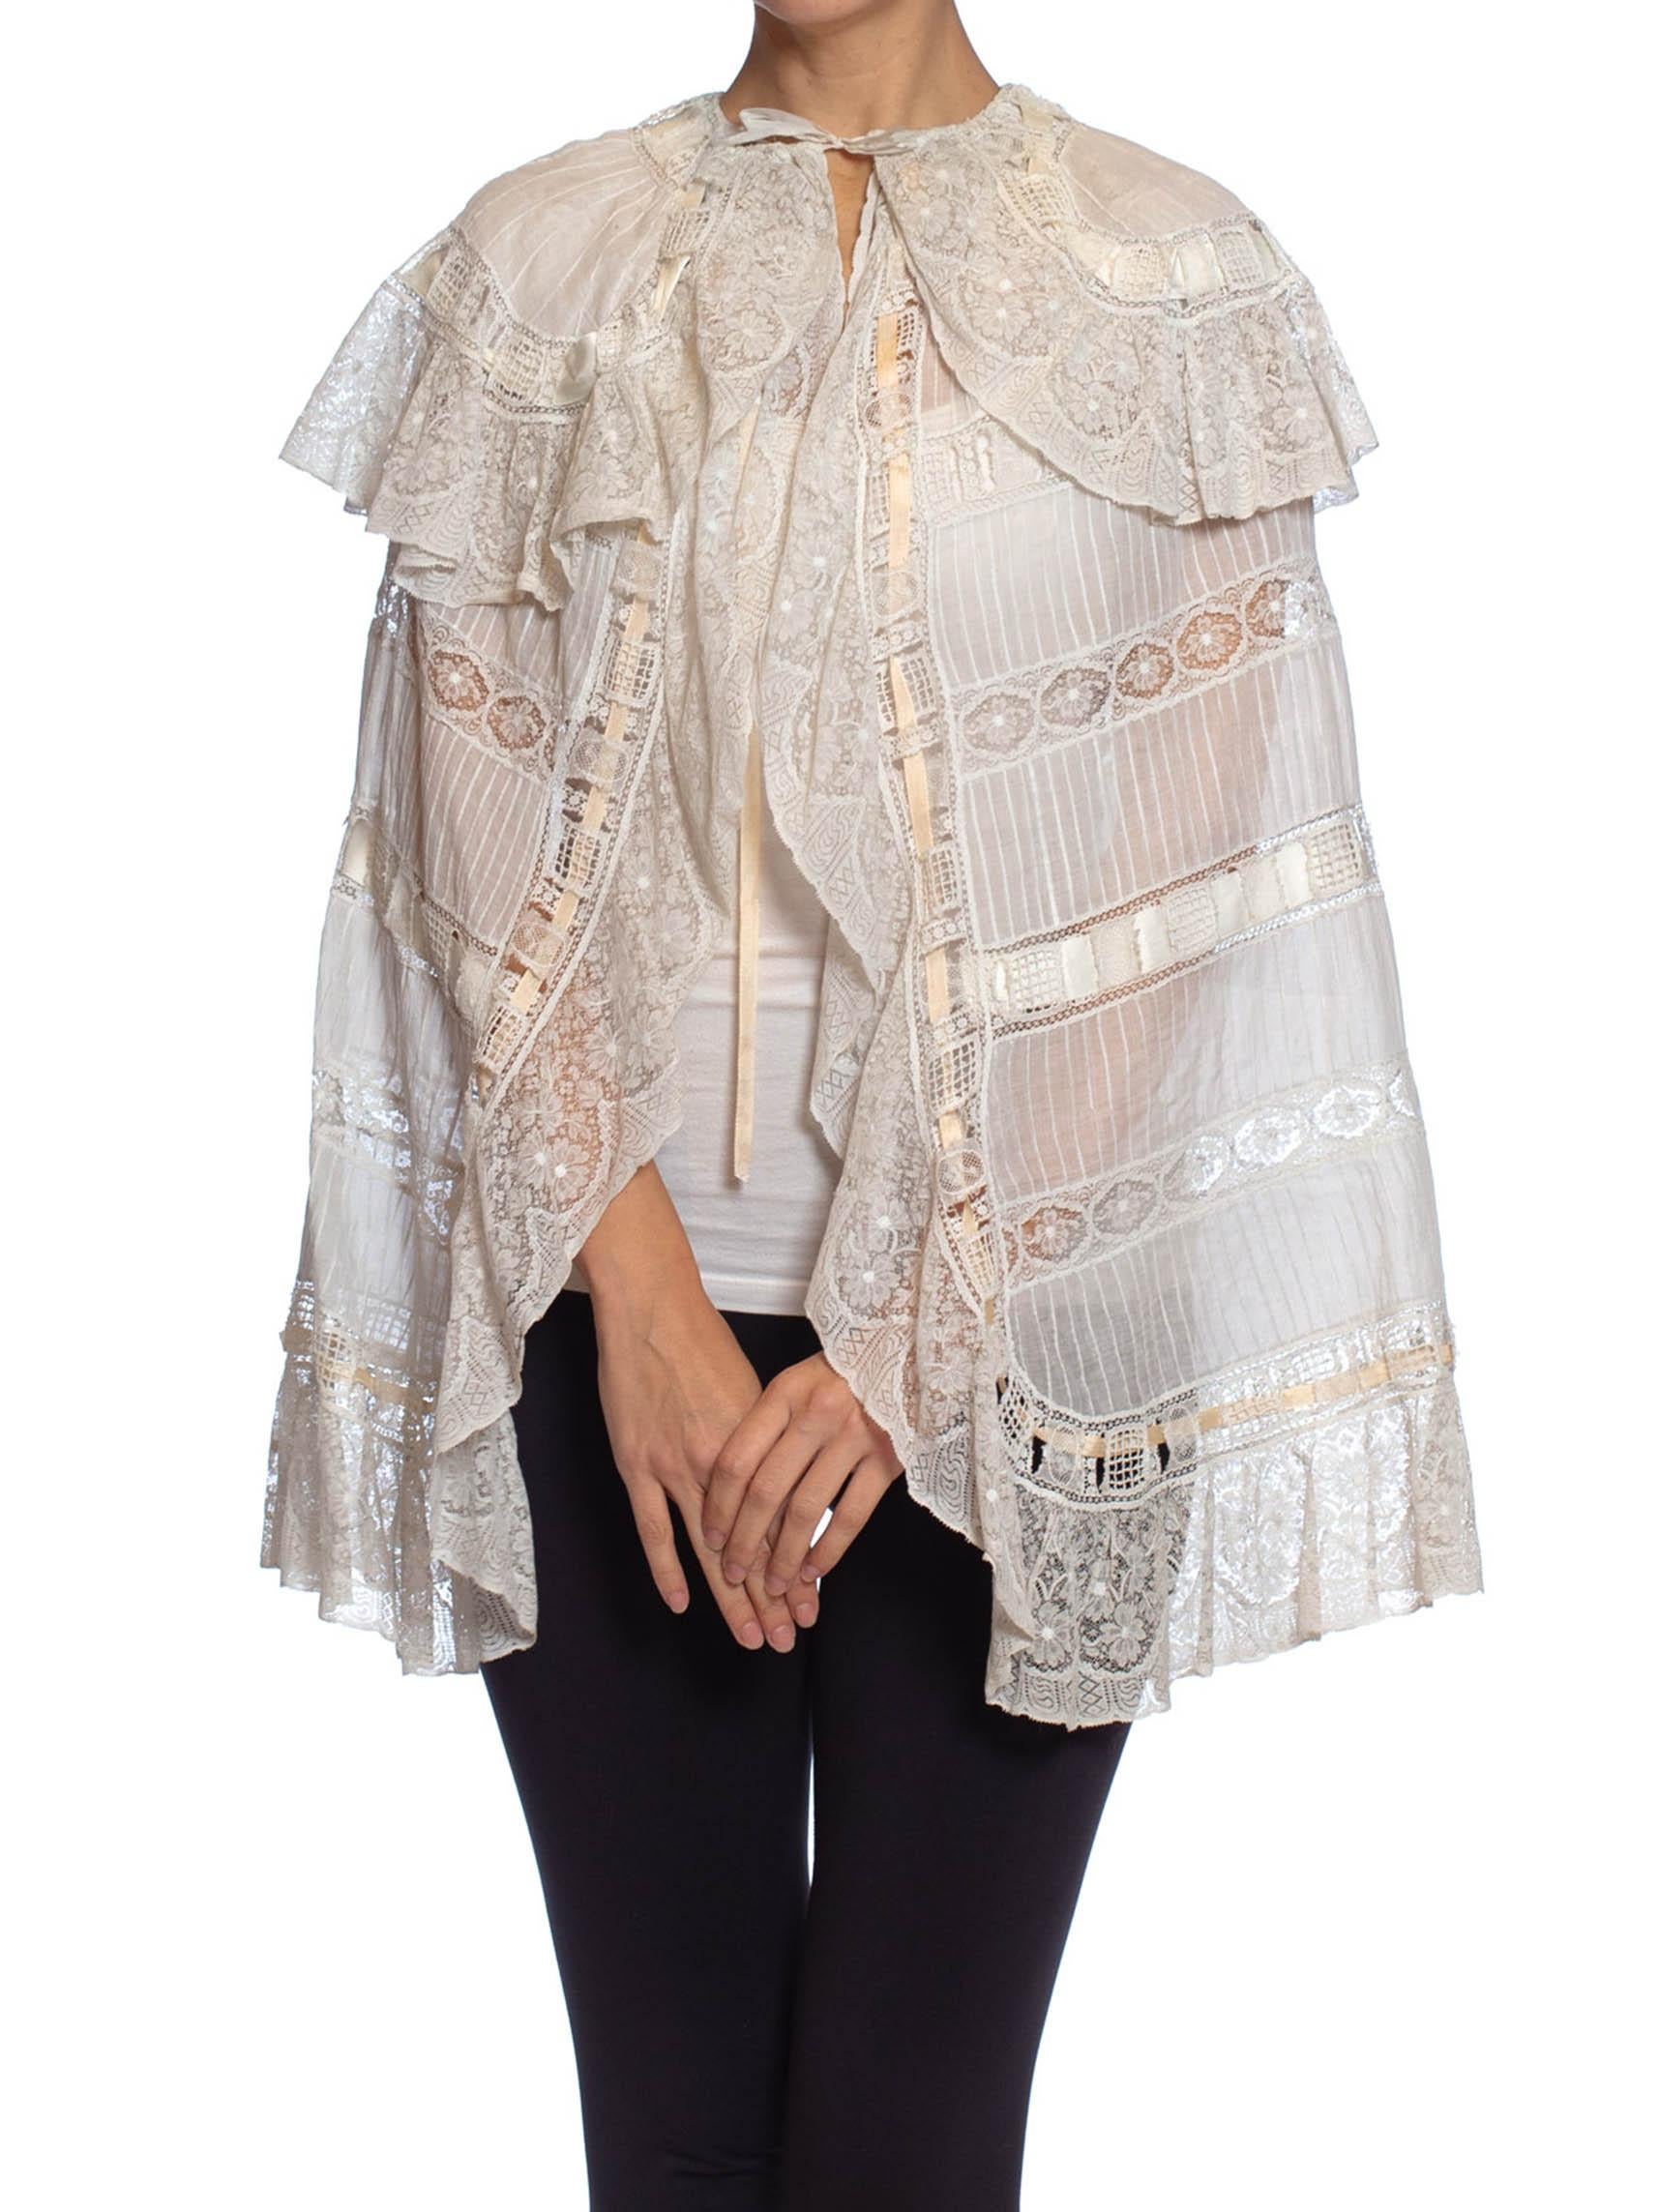 Victorian White Cotton Voile & Lace Cape Entirely Pin-Tucked By Hand From Paris For Sale 2